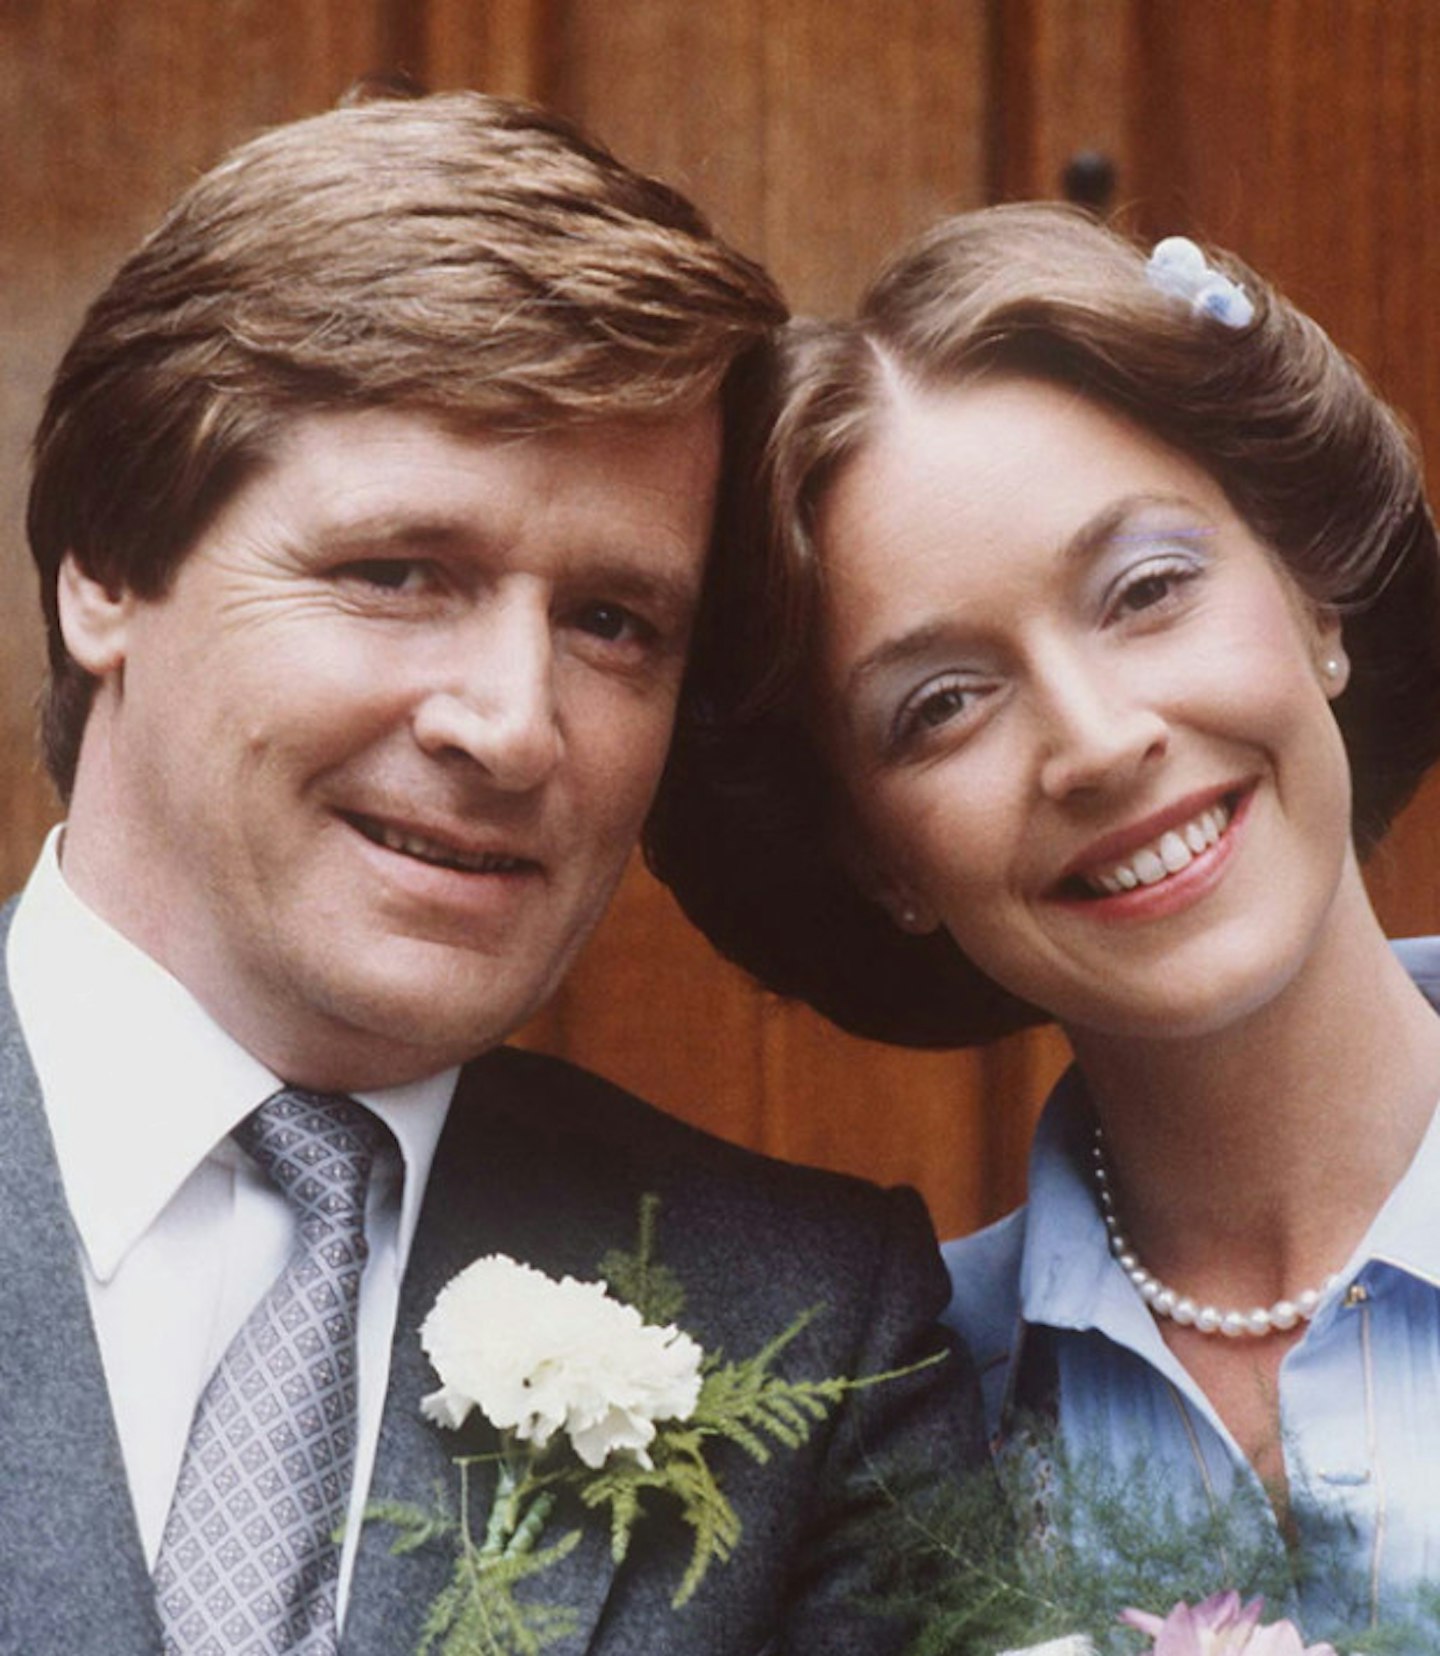 Ken tied the knot with Deirdre and her nice hair back in 1981